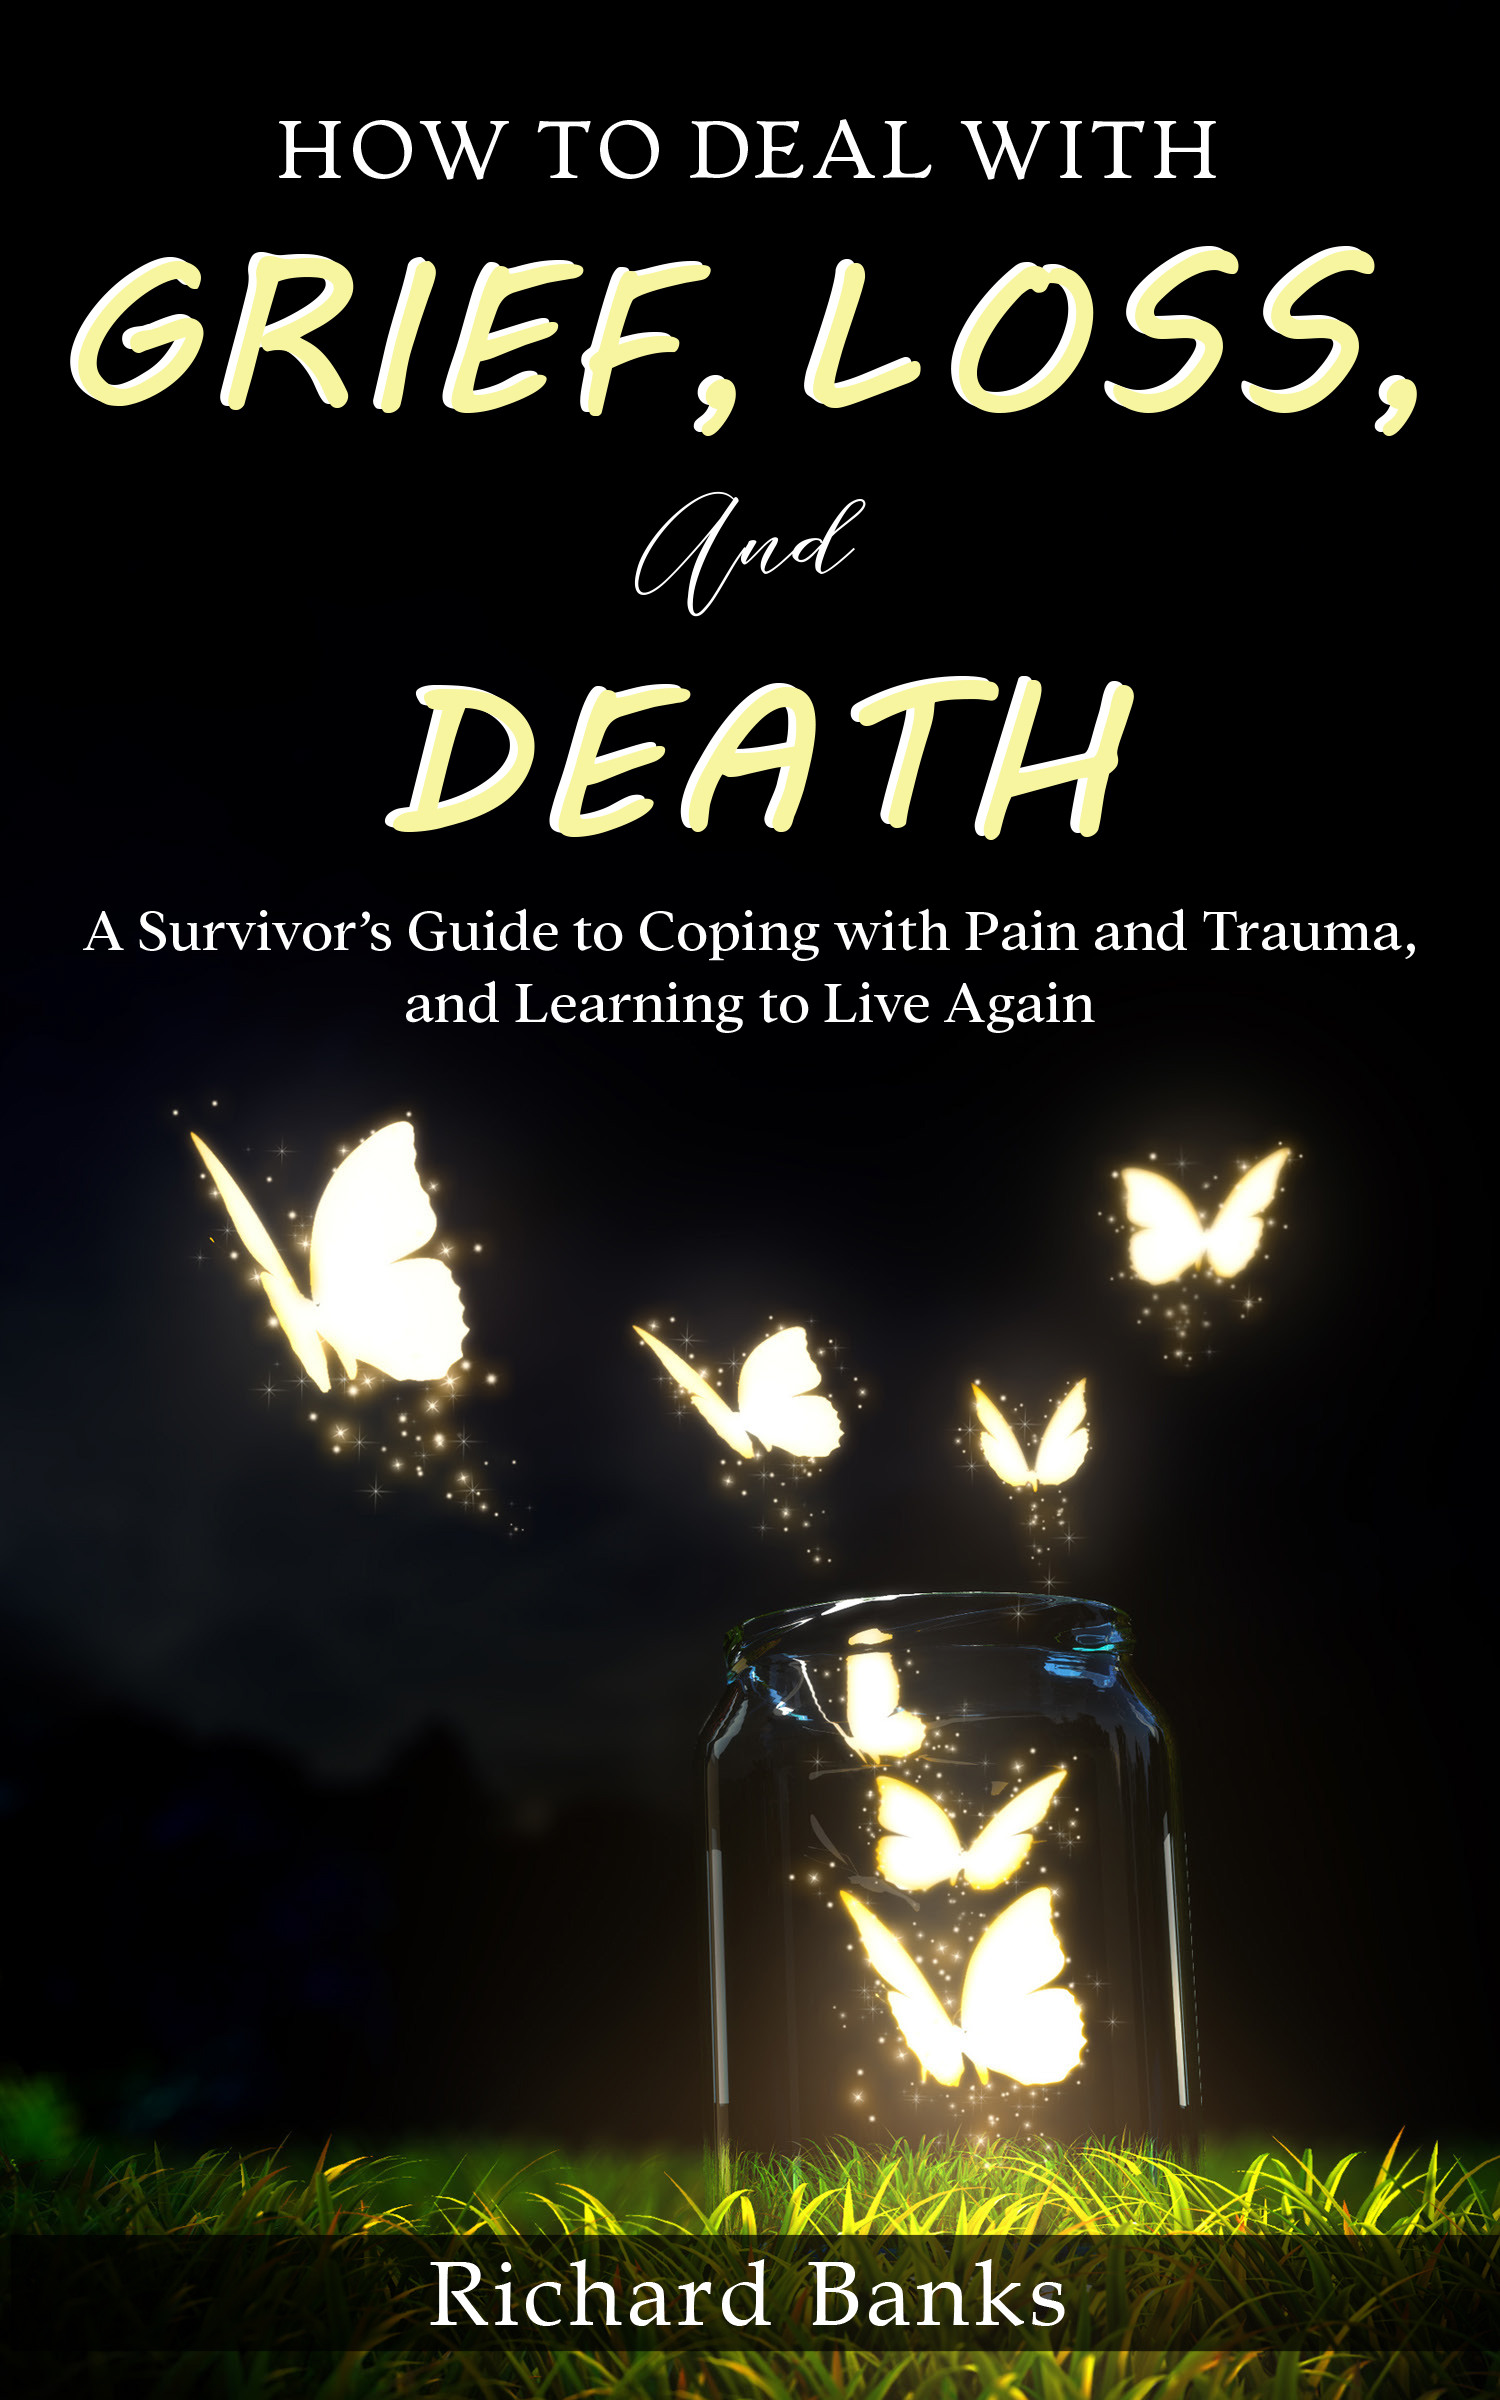 FREE: How to Deal with Grief, Loss, and Death: A Survivor’s Guide to Coping with Pain and Trauma, and Learning to Live Again by Richard Banks